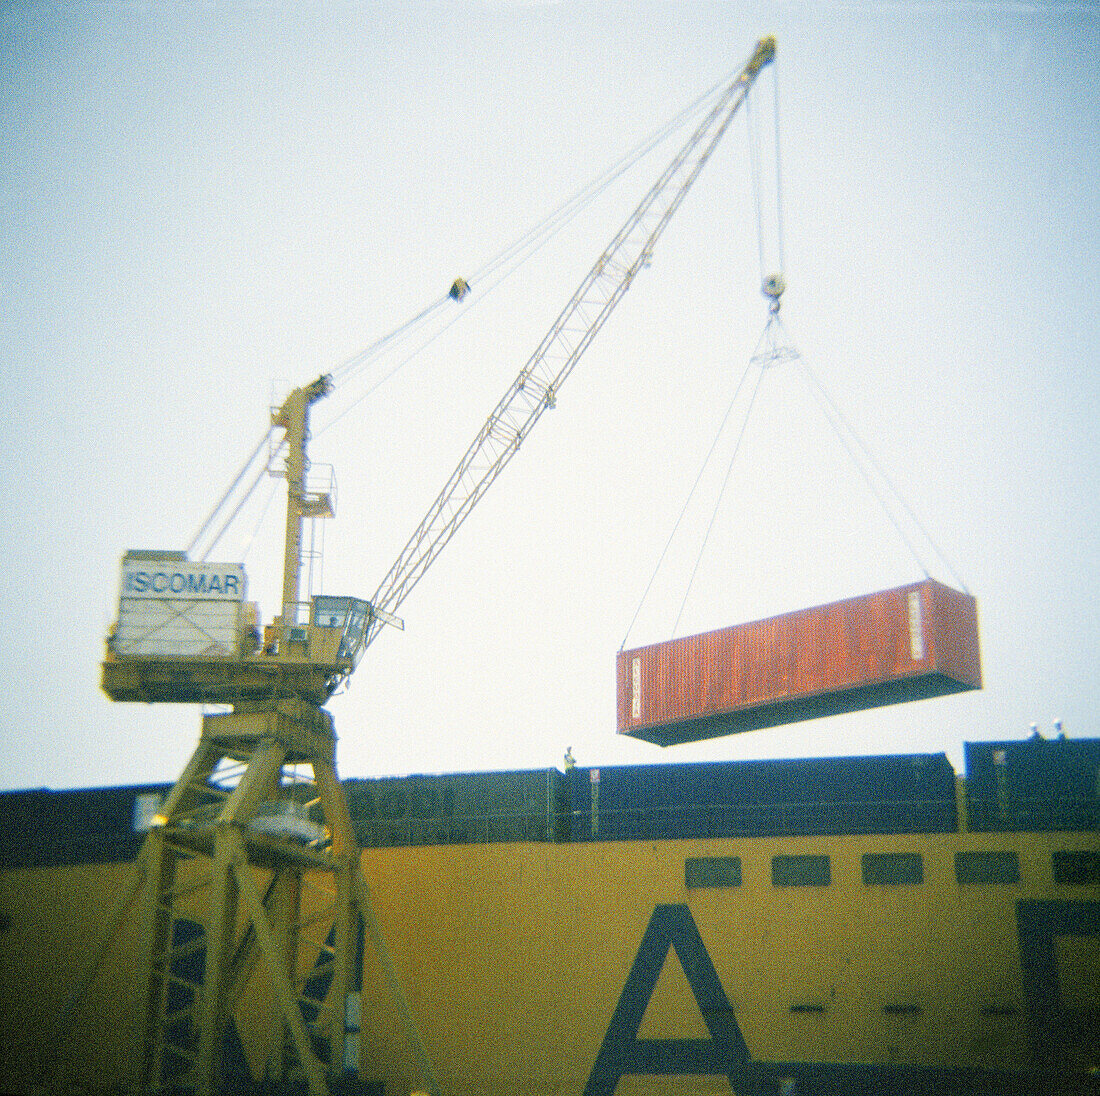  Cargo container, Cargo containers, Color, Colour, Commerce, Container ship, Container ships, Containership, Containerships, Crane, Cranes, Daytime, Dock, Docks, Economy, Export, Exports, Exterior, Harbor, Harbors, Harbour, Harbours, Industrial, Industry,